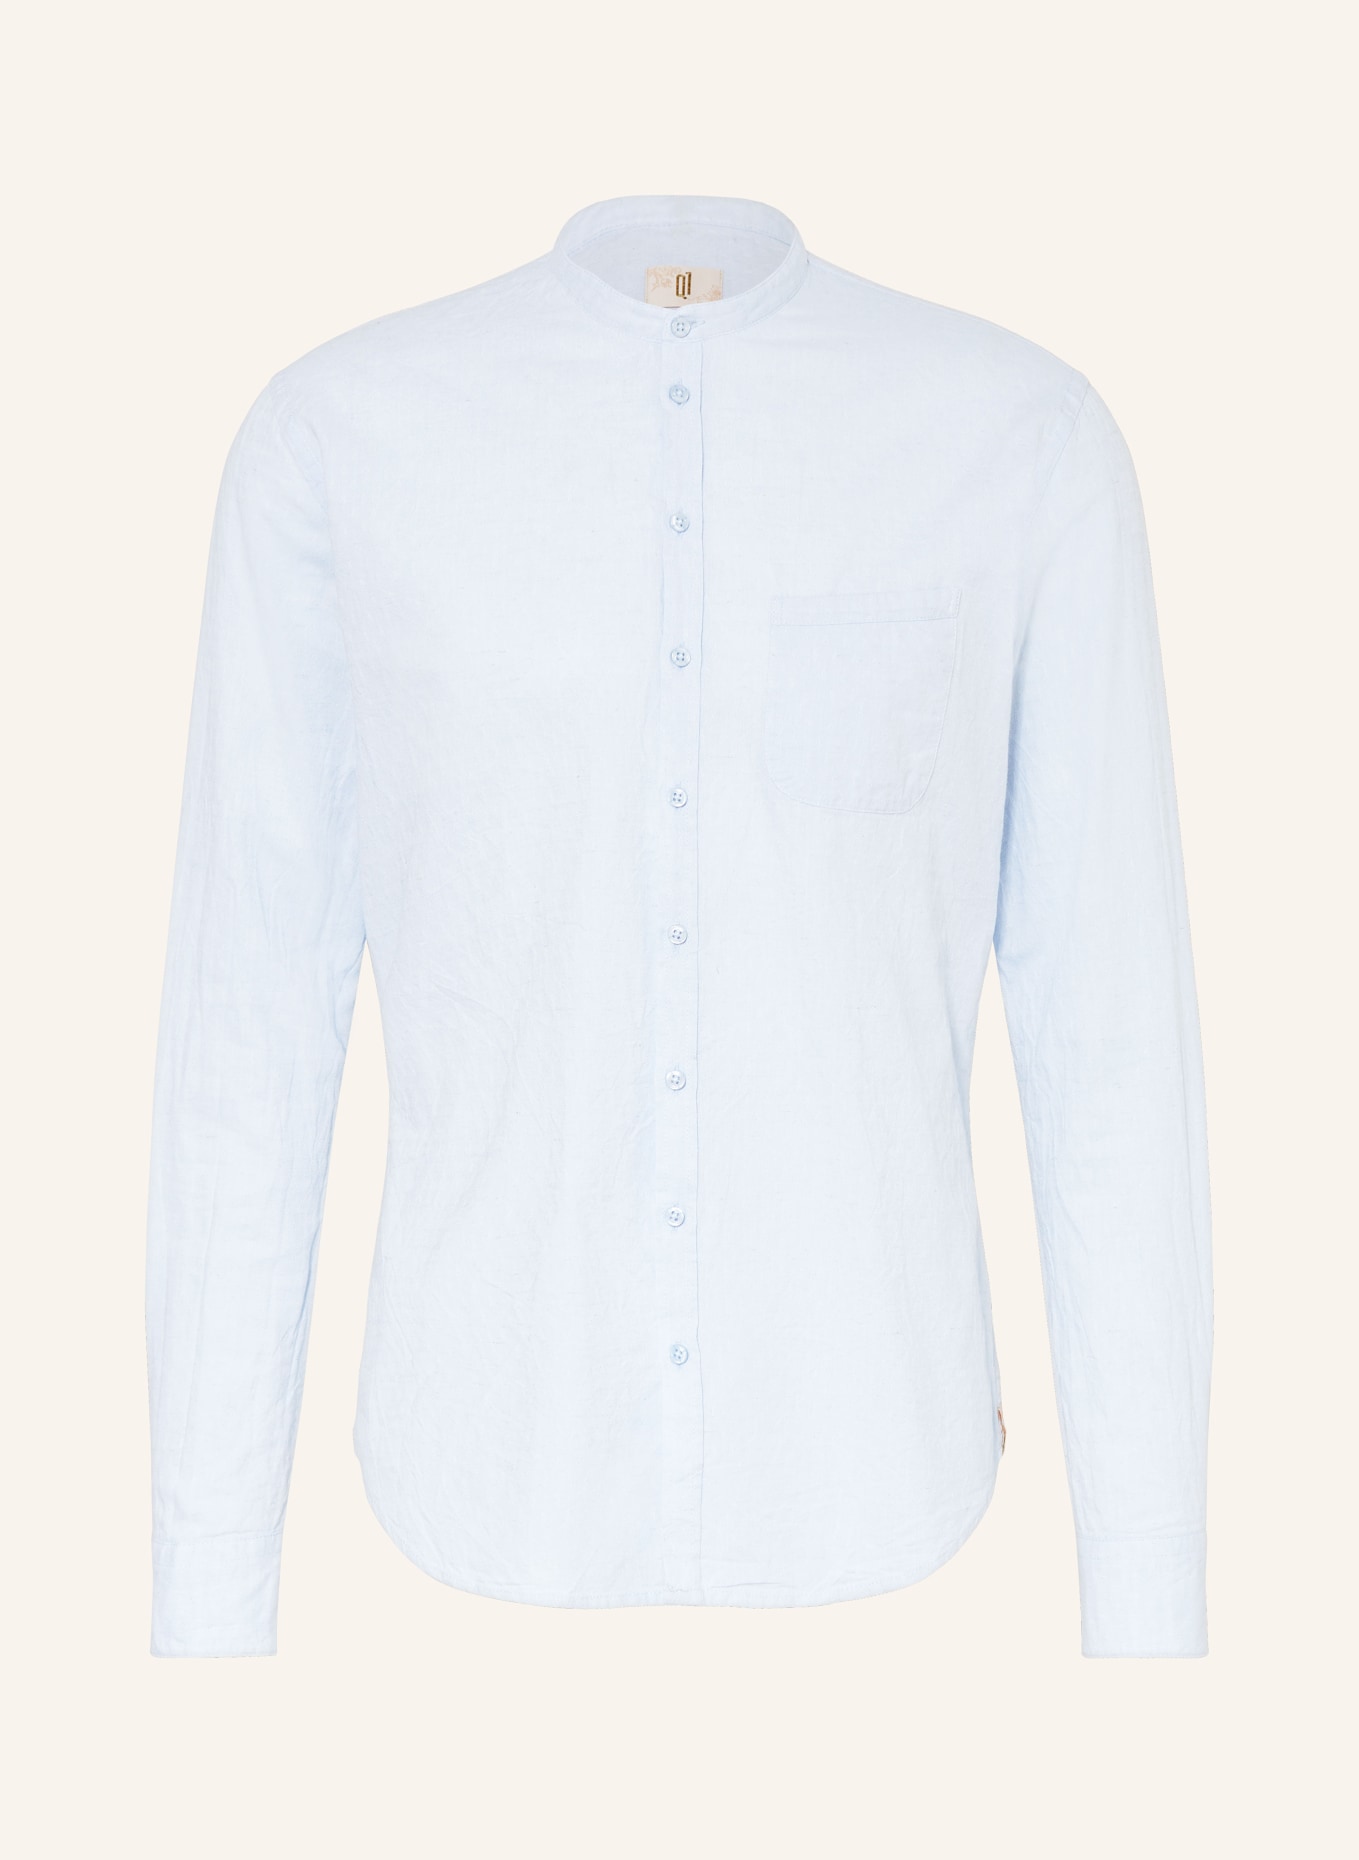 Q1 Manufaktur Shirt slim relaxed fit with stand-up collar and linen, Color: LIGHT BLUE (Image 1)